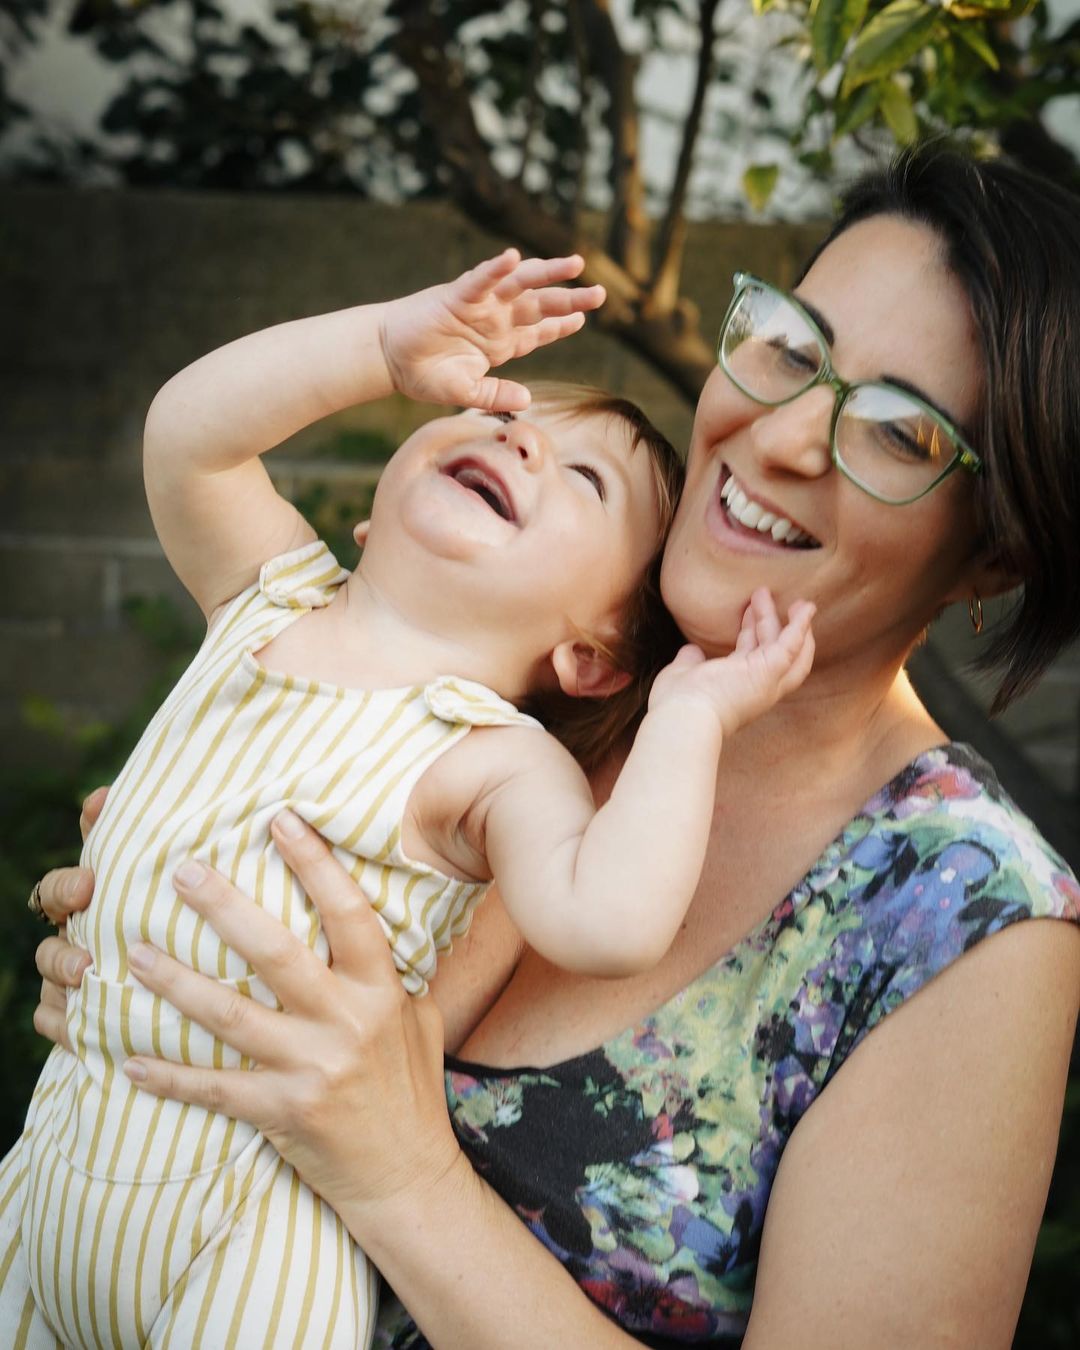 SDM contributor María José Durán smiling and holding one of her kids outside